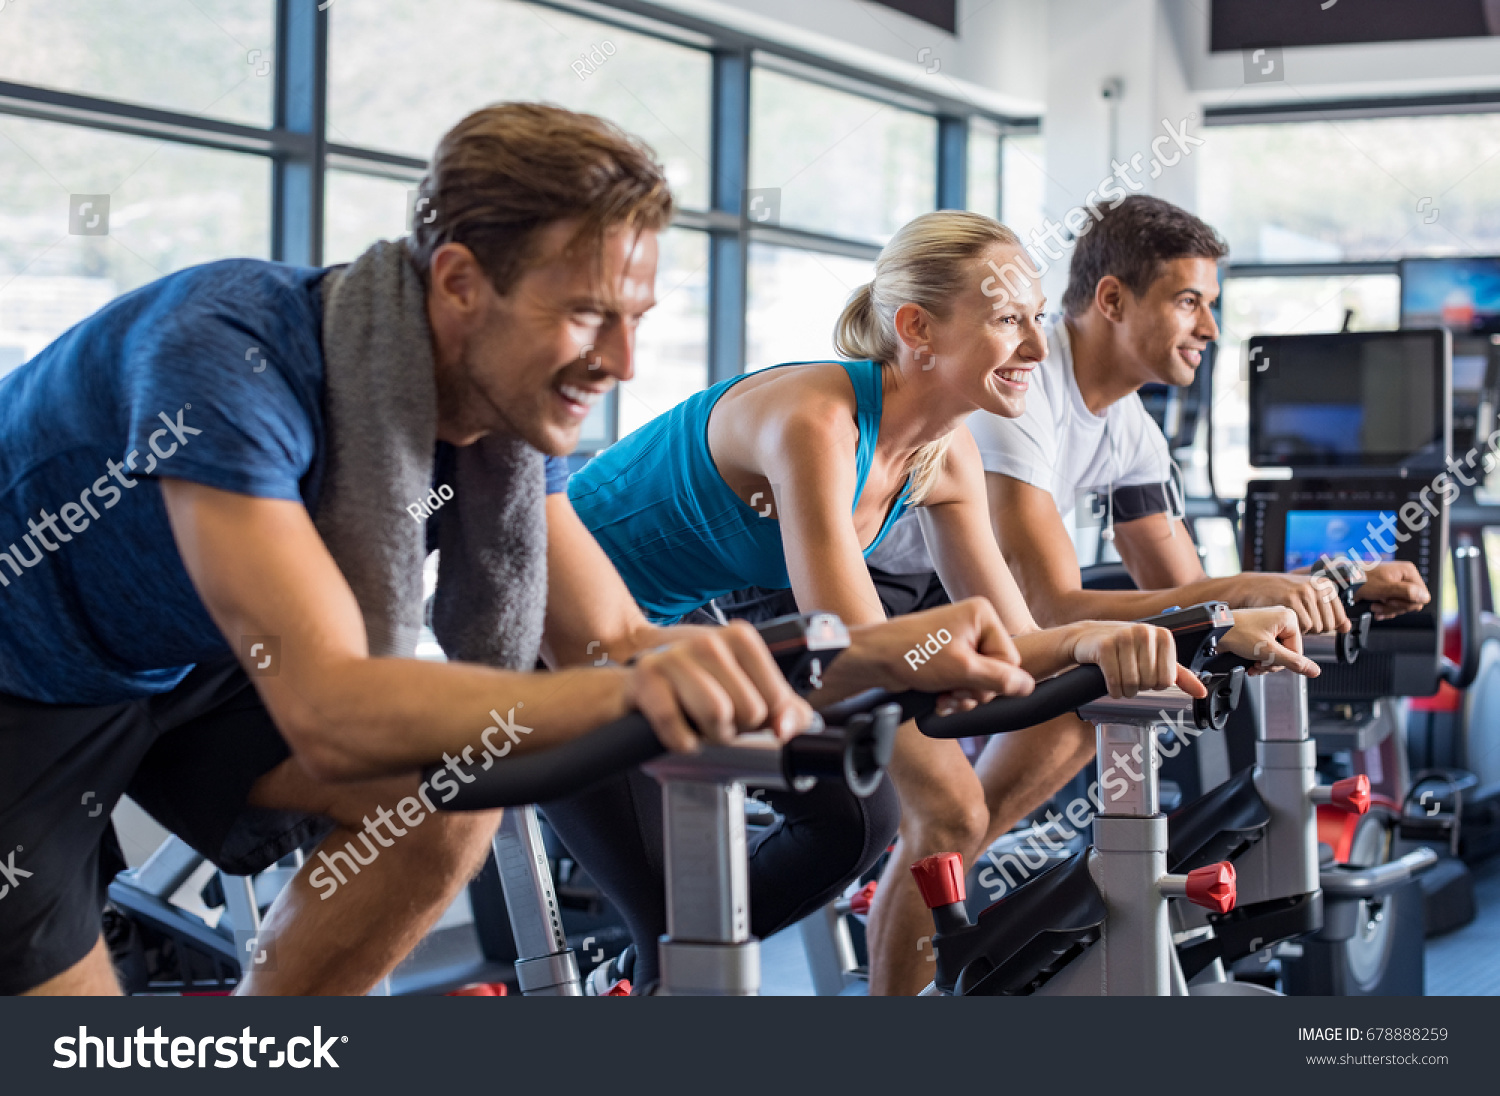 Group of smiling friends at gym exercising on stationary bike. Happy cheerful athletes training on exercise bike. Young men and woman working out at a class in the gym. #678888259